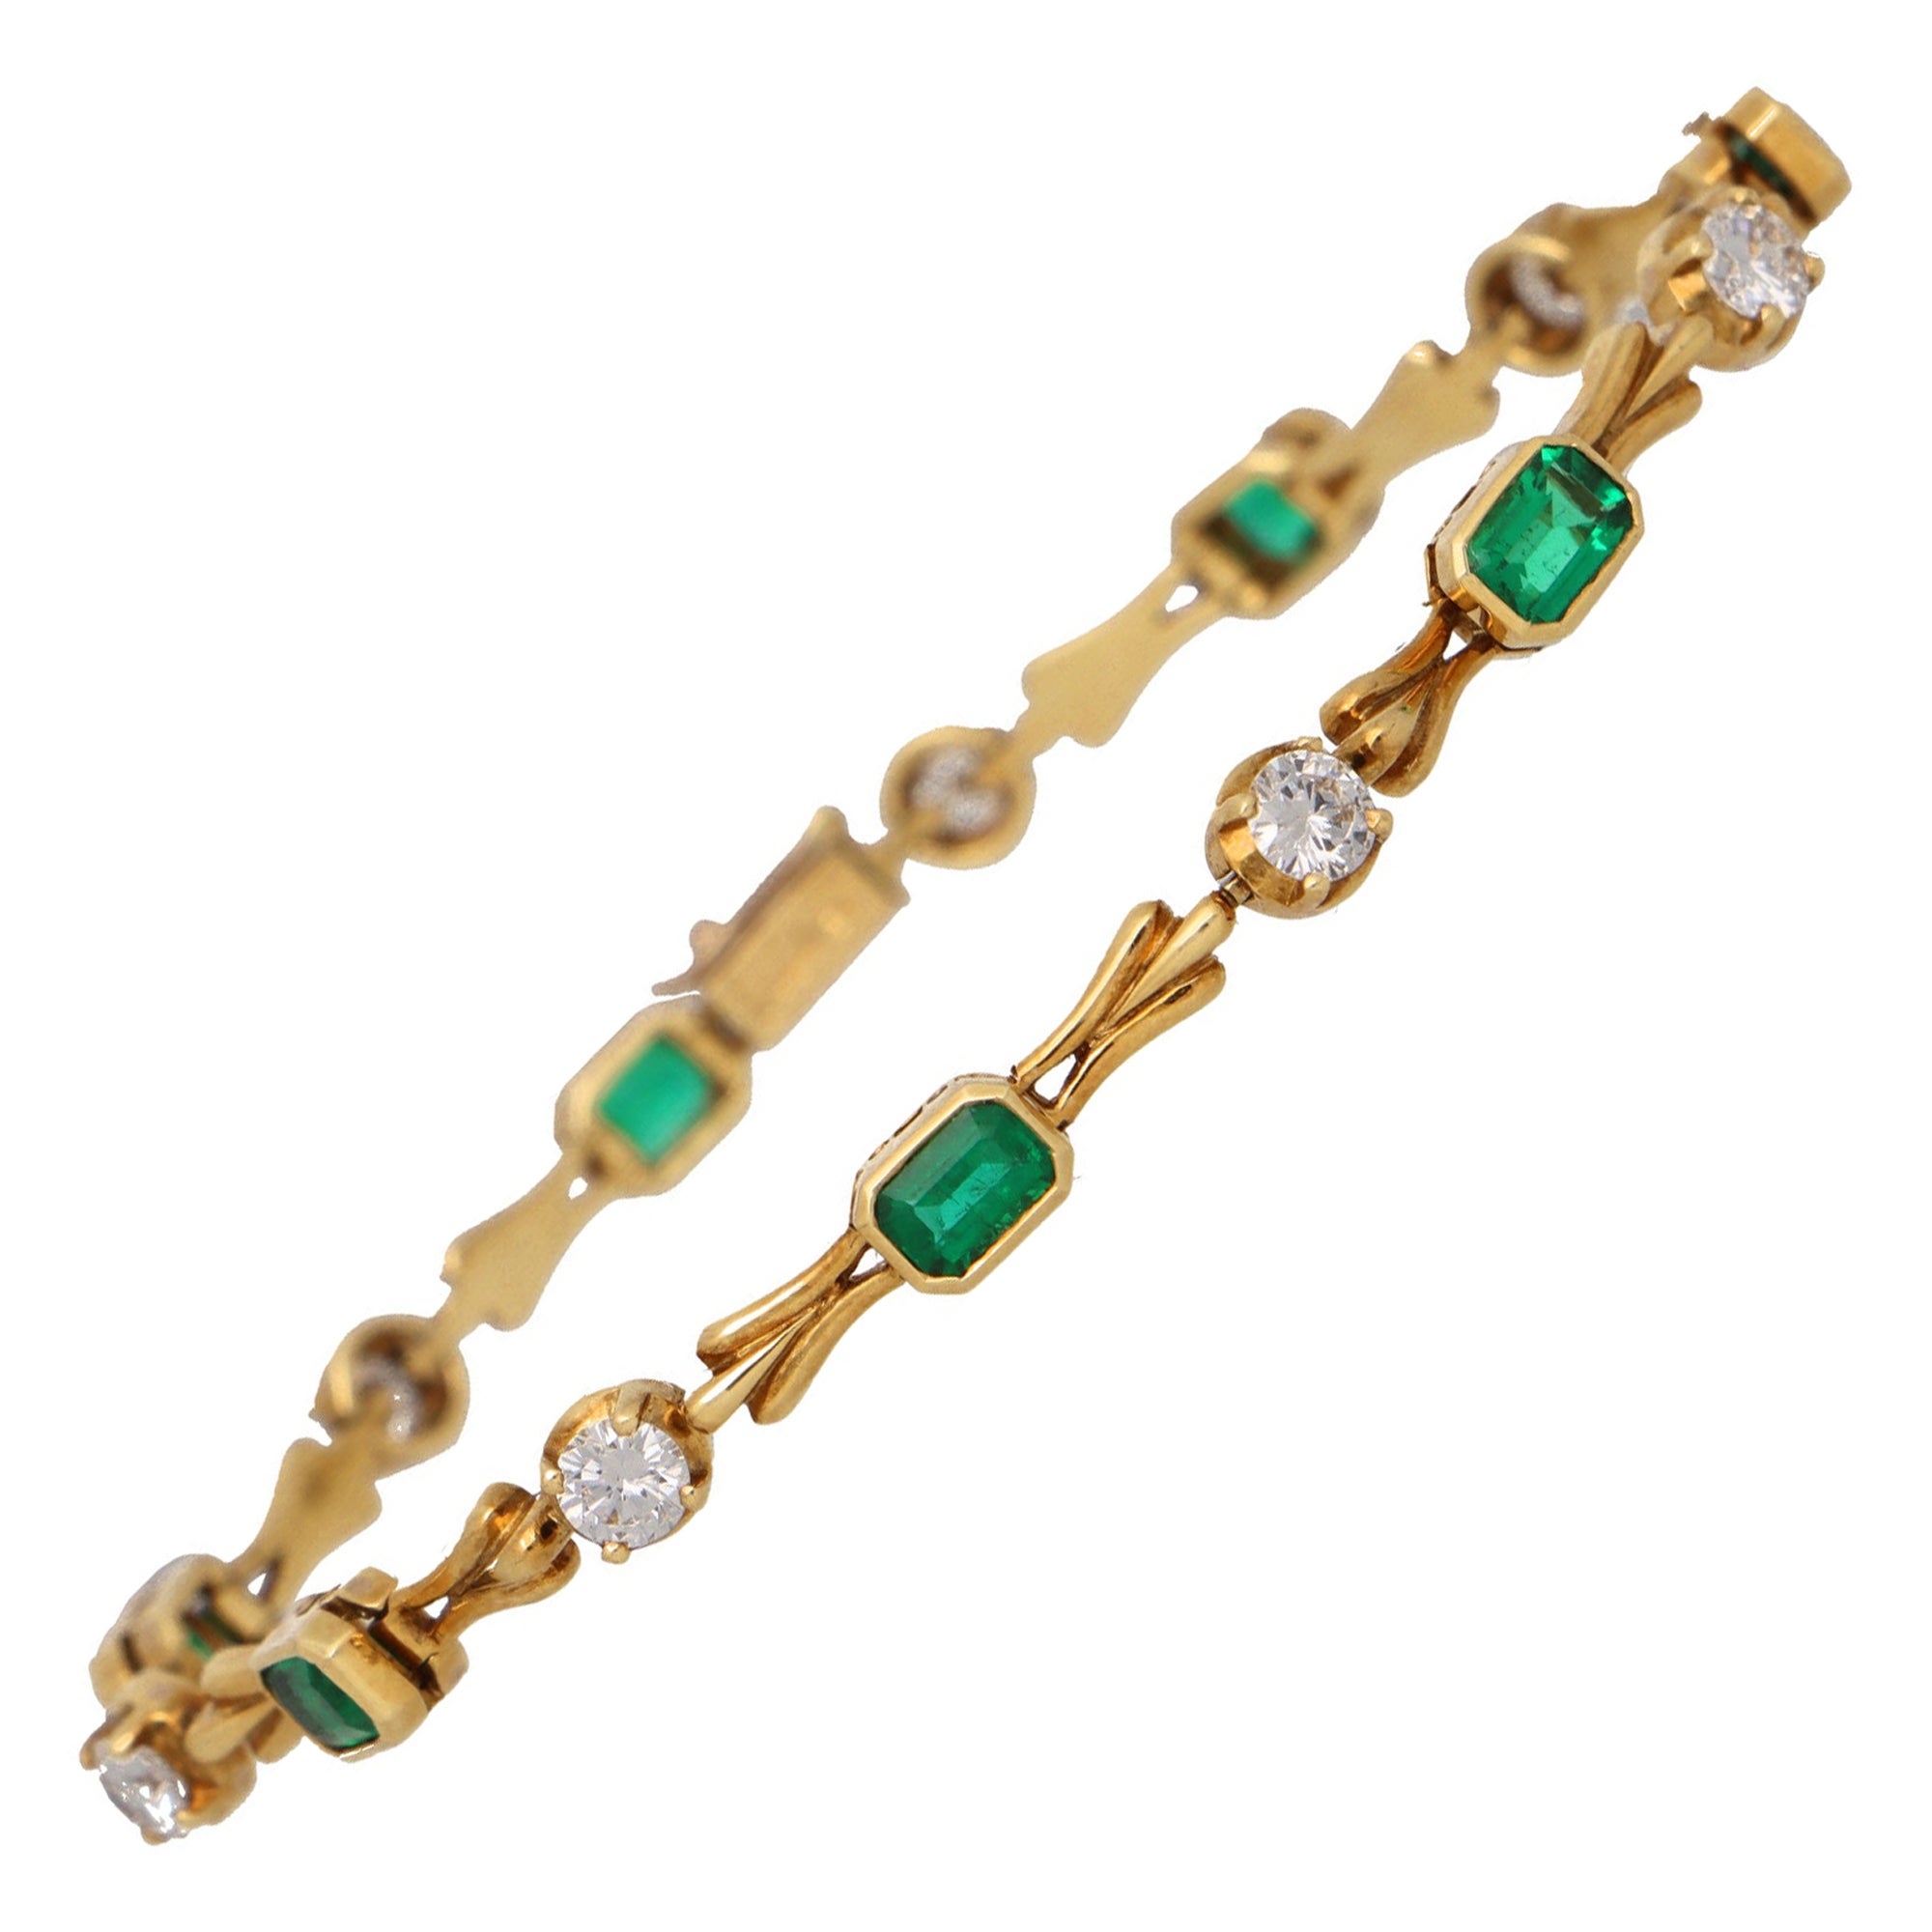 Vintage Boodles Emerald and Diamond Bracelet Set in 18k Yellow Gold